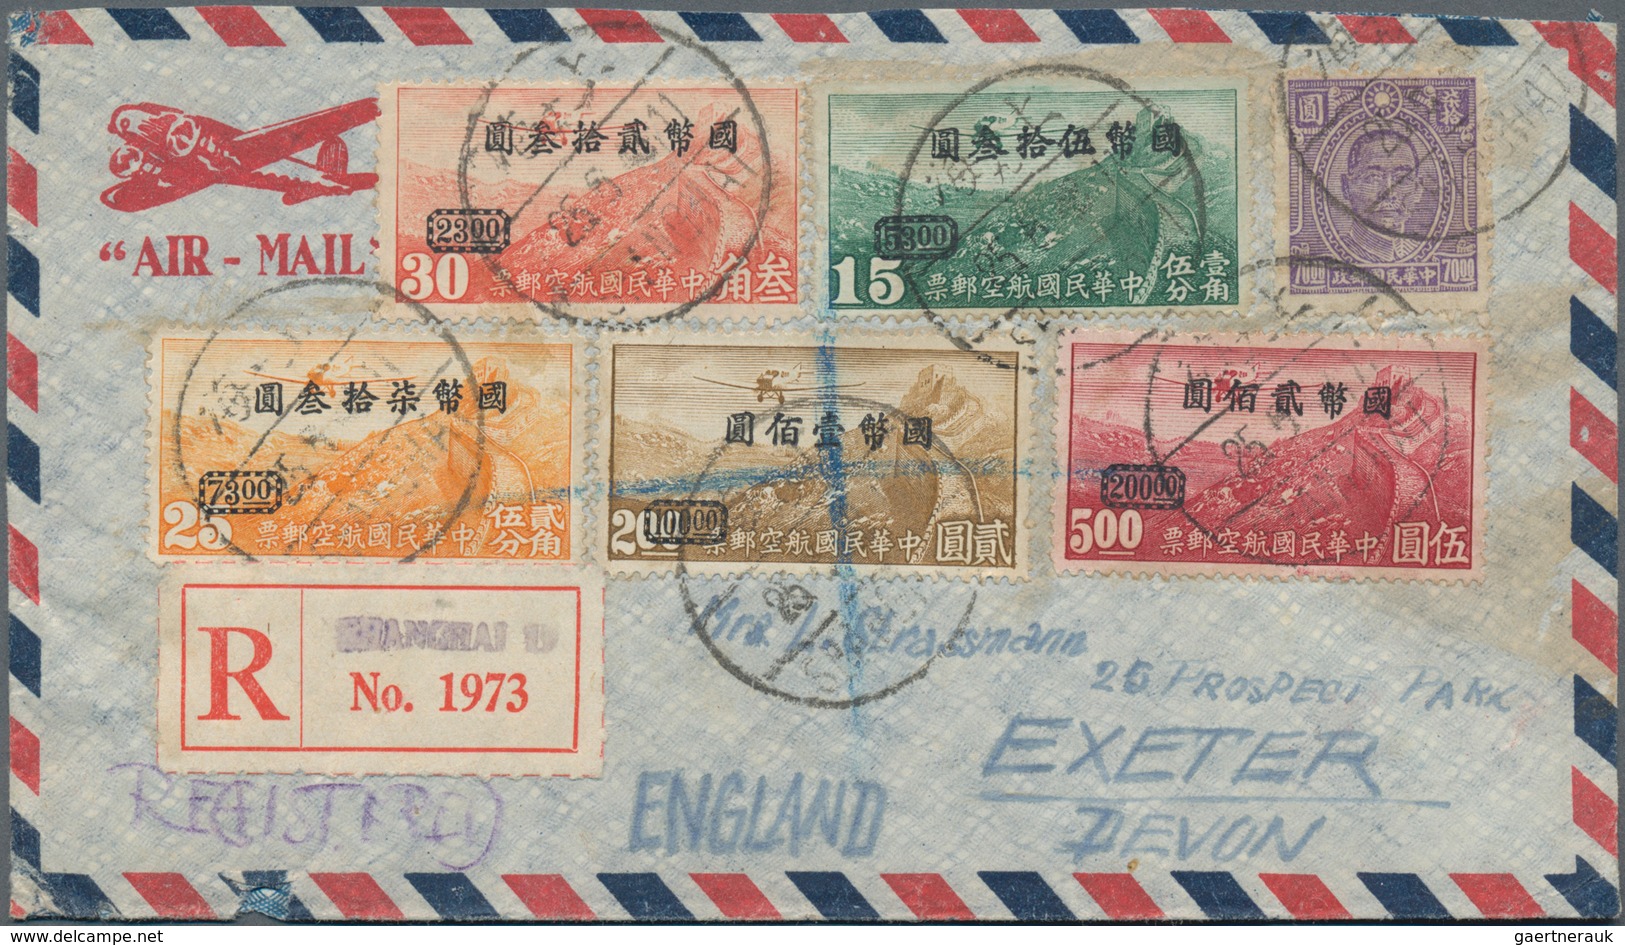 China: 1941/48, covers (17) mostly airmail inc. three registered (one censored) 1941 Chungking-Hong